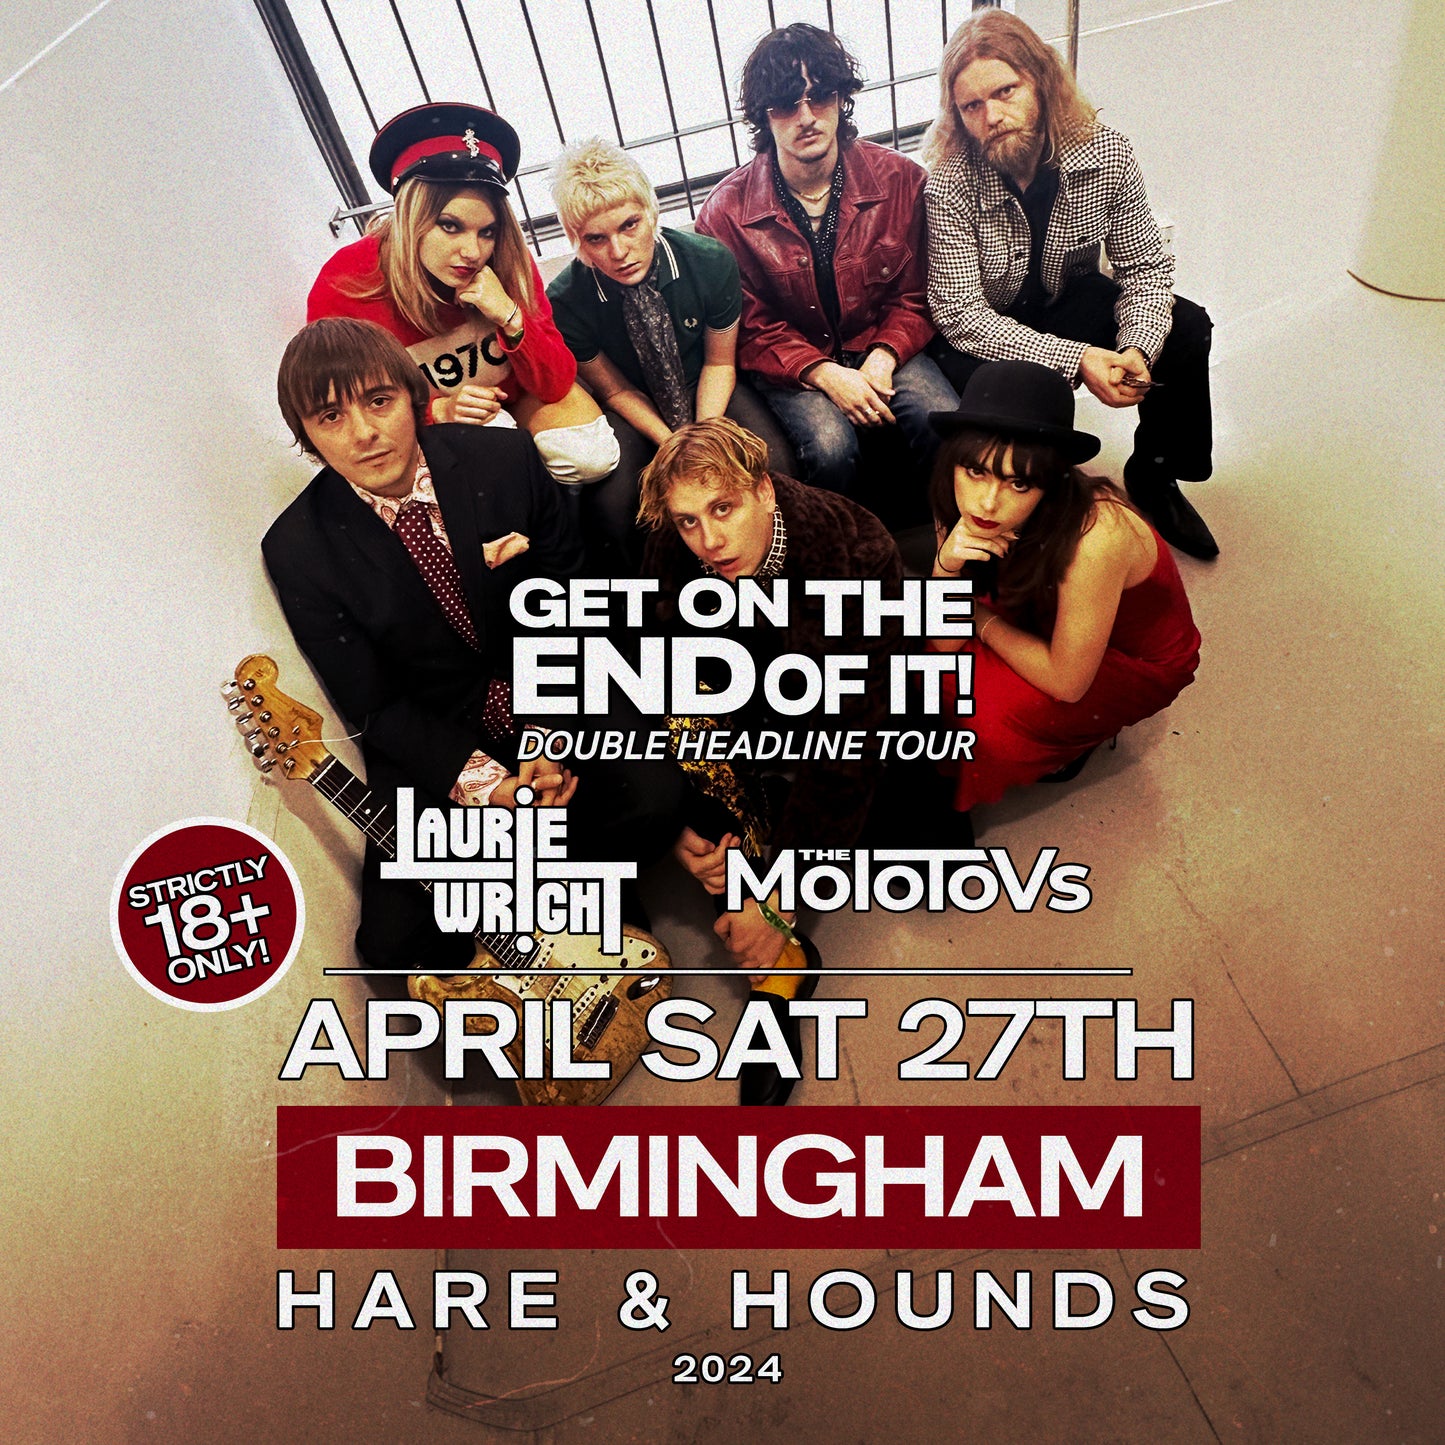 BIRMINGHAM | HARE & HOUNDS | 27.04.24 | Get On The End Of It: Double Headline Tour